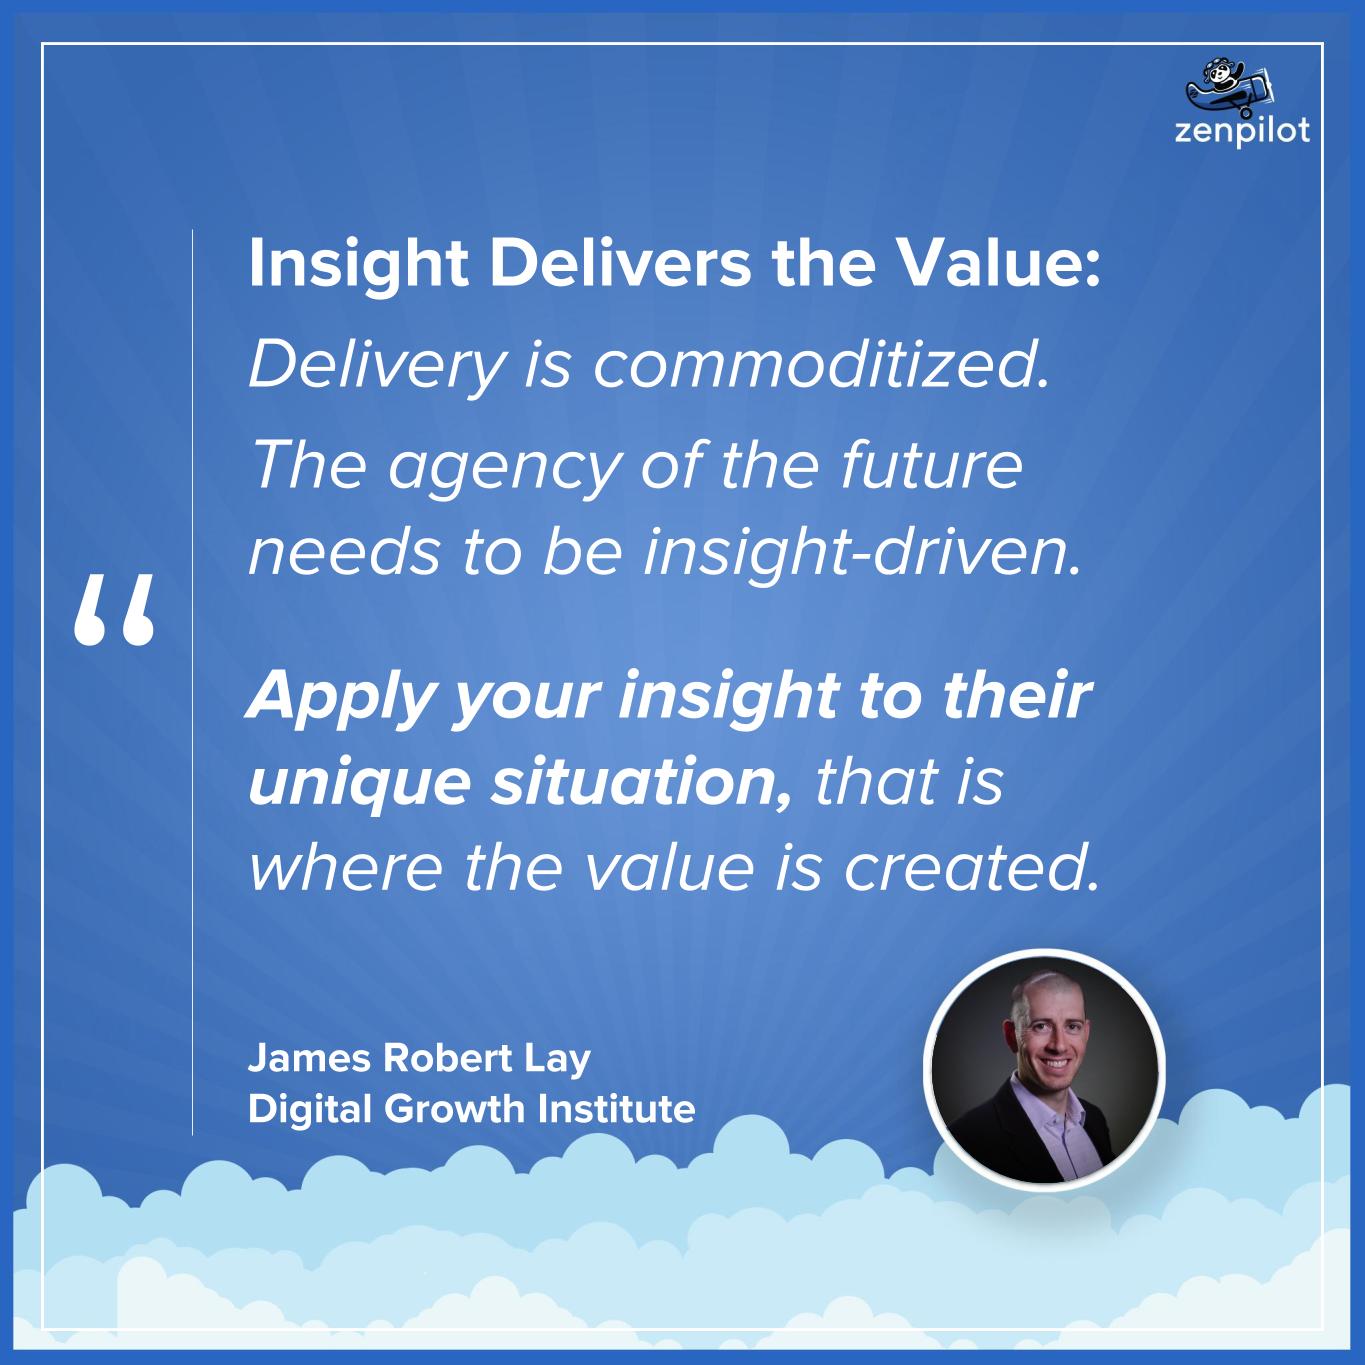 agency-of-the-future-james-robert-lay-agency-journey